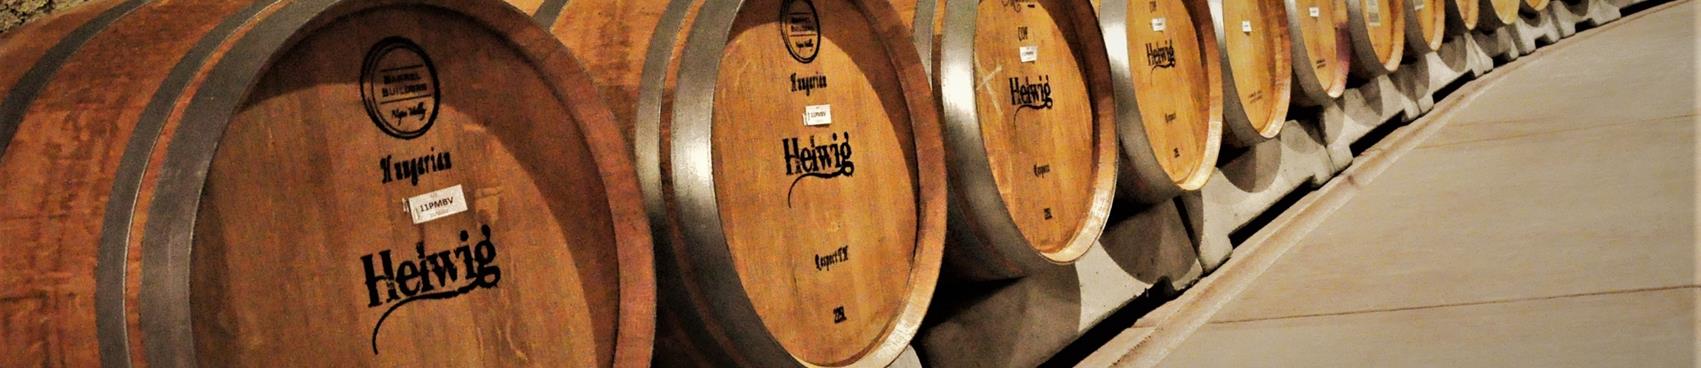 Purchase tickets to Helwig Winery on CellarPass